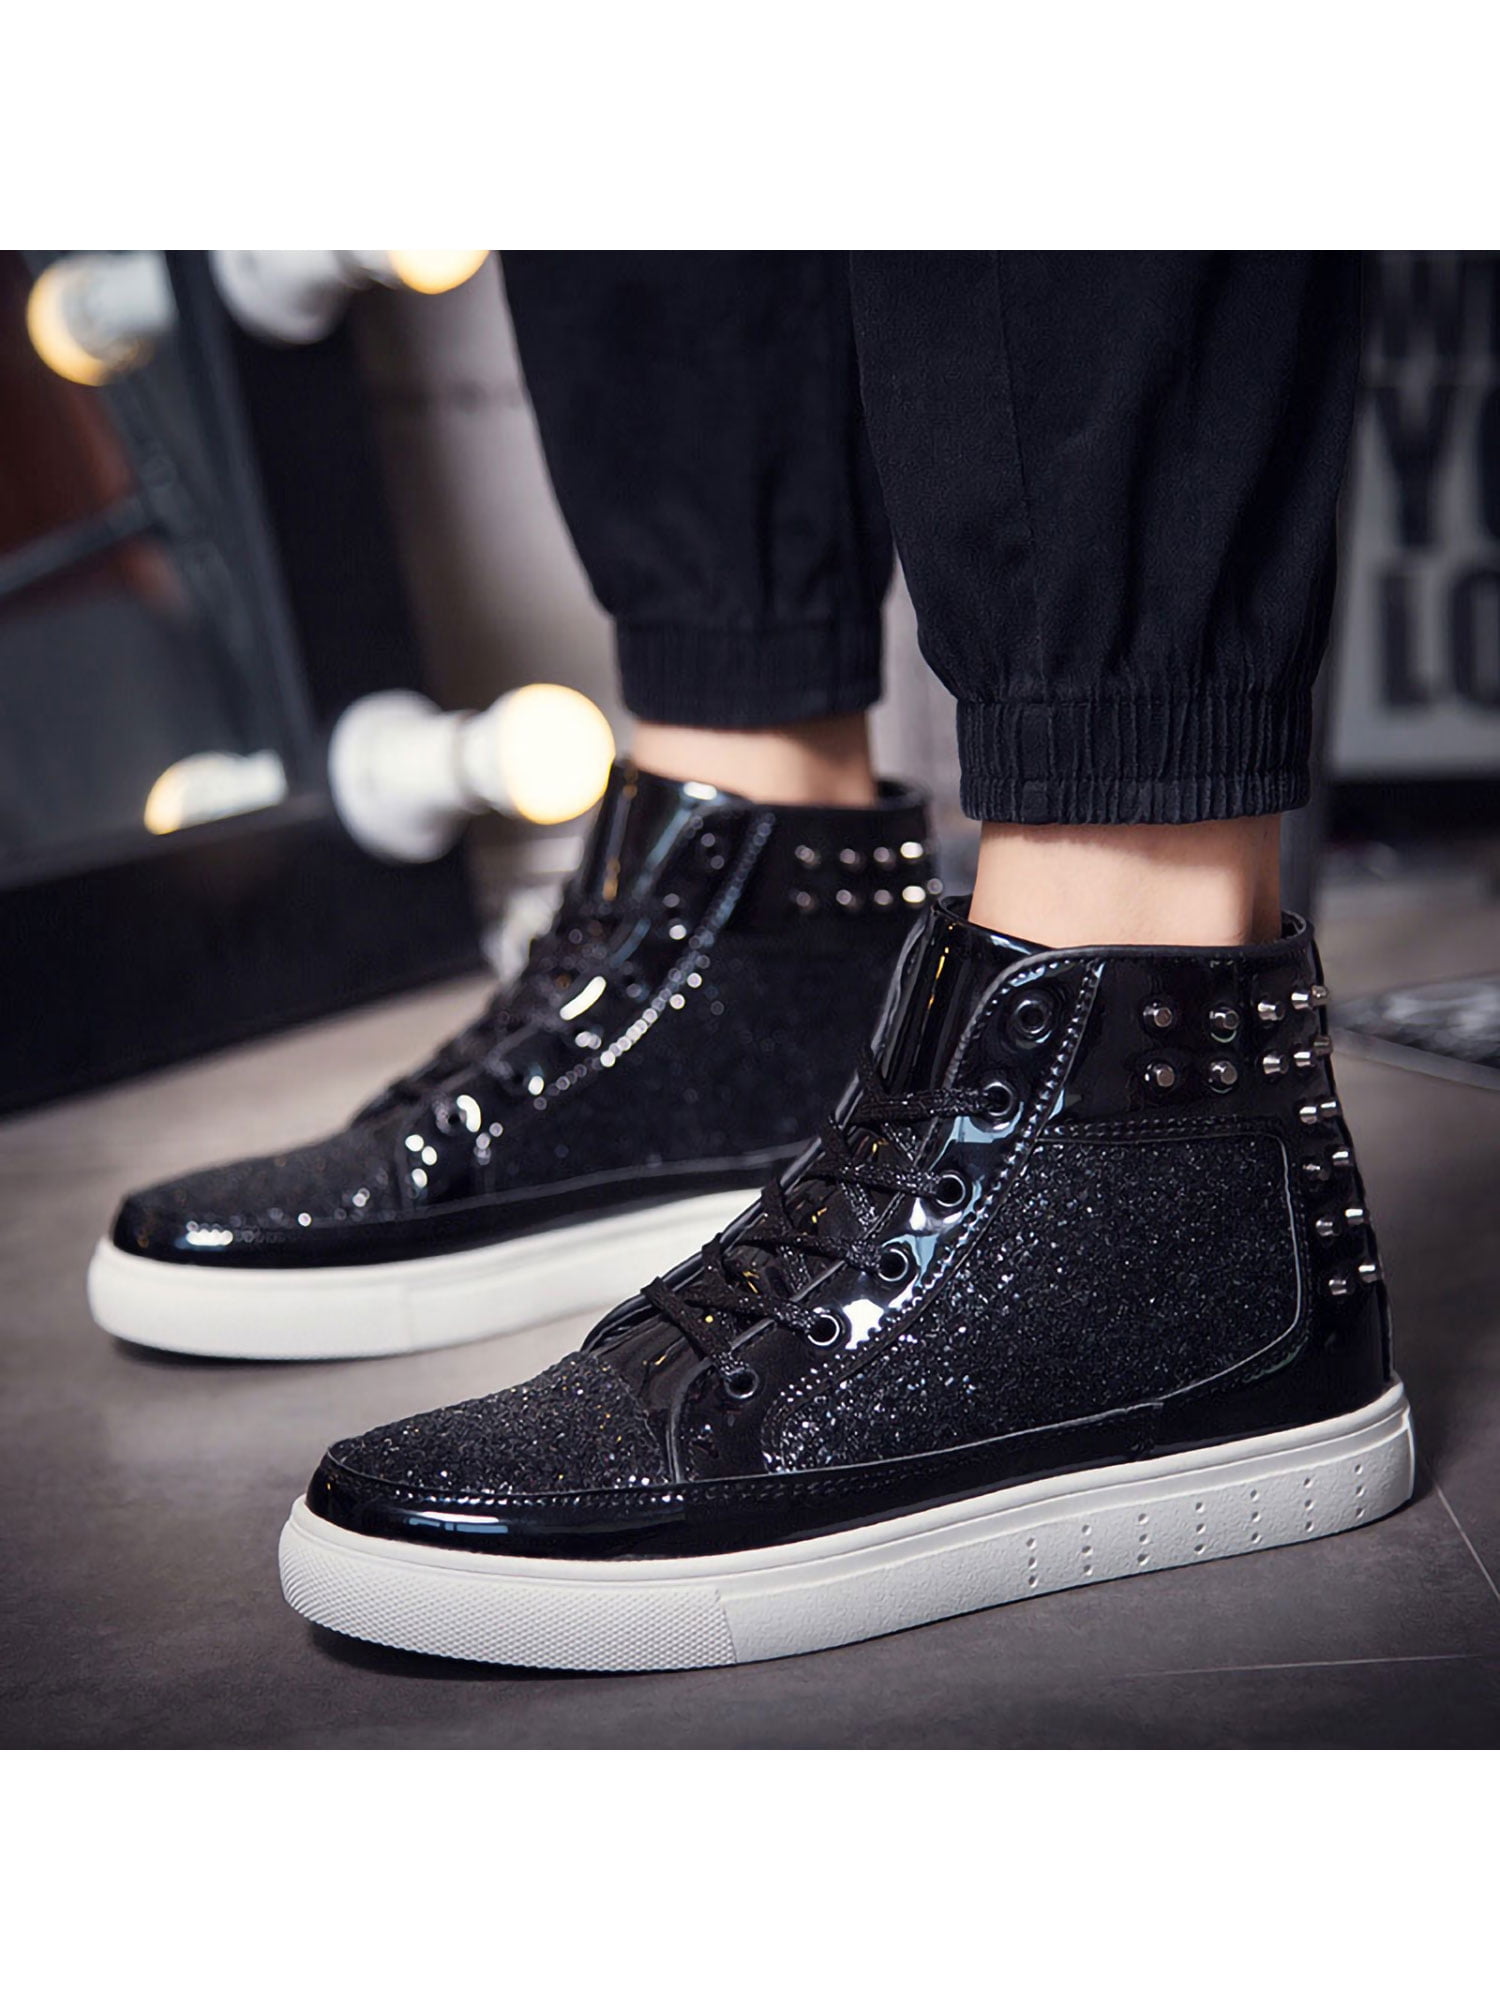 Fashion Men's Faux Patent Leather Bling Bling Lace Up High Top Shoes Sneakers N 